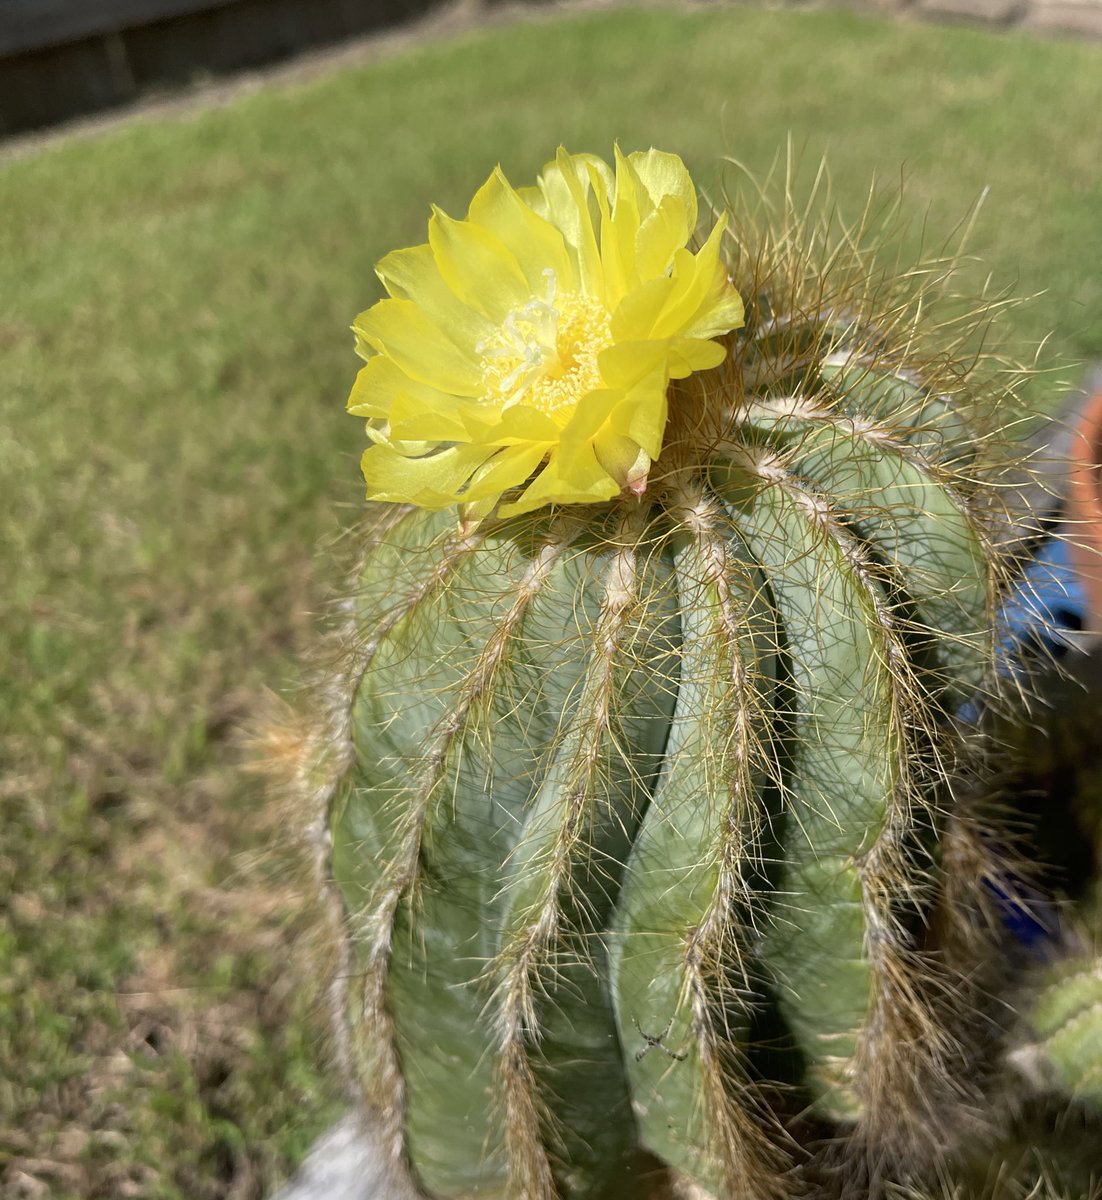 I went out the back to hang some washing on the line & saw one of my cacti is in flower. This one rarely flowers. I’m glad I saw it. It gave me joy. I wish you some joy in your day, even a little. Have a good one! 🌼👋🏽😀